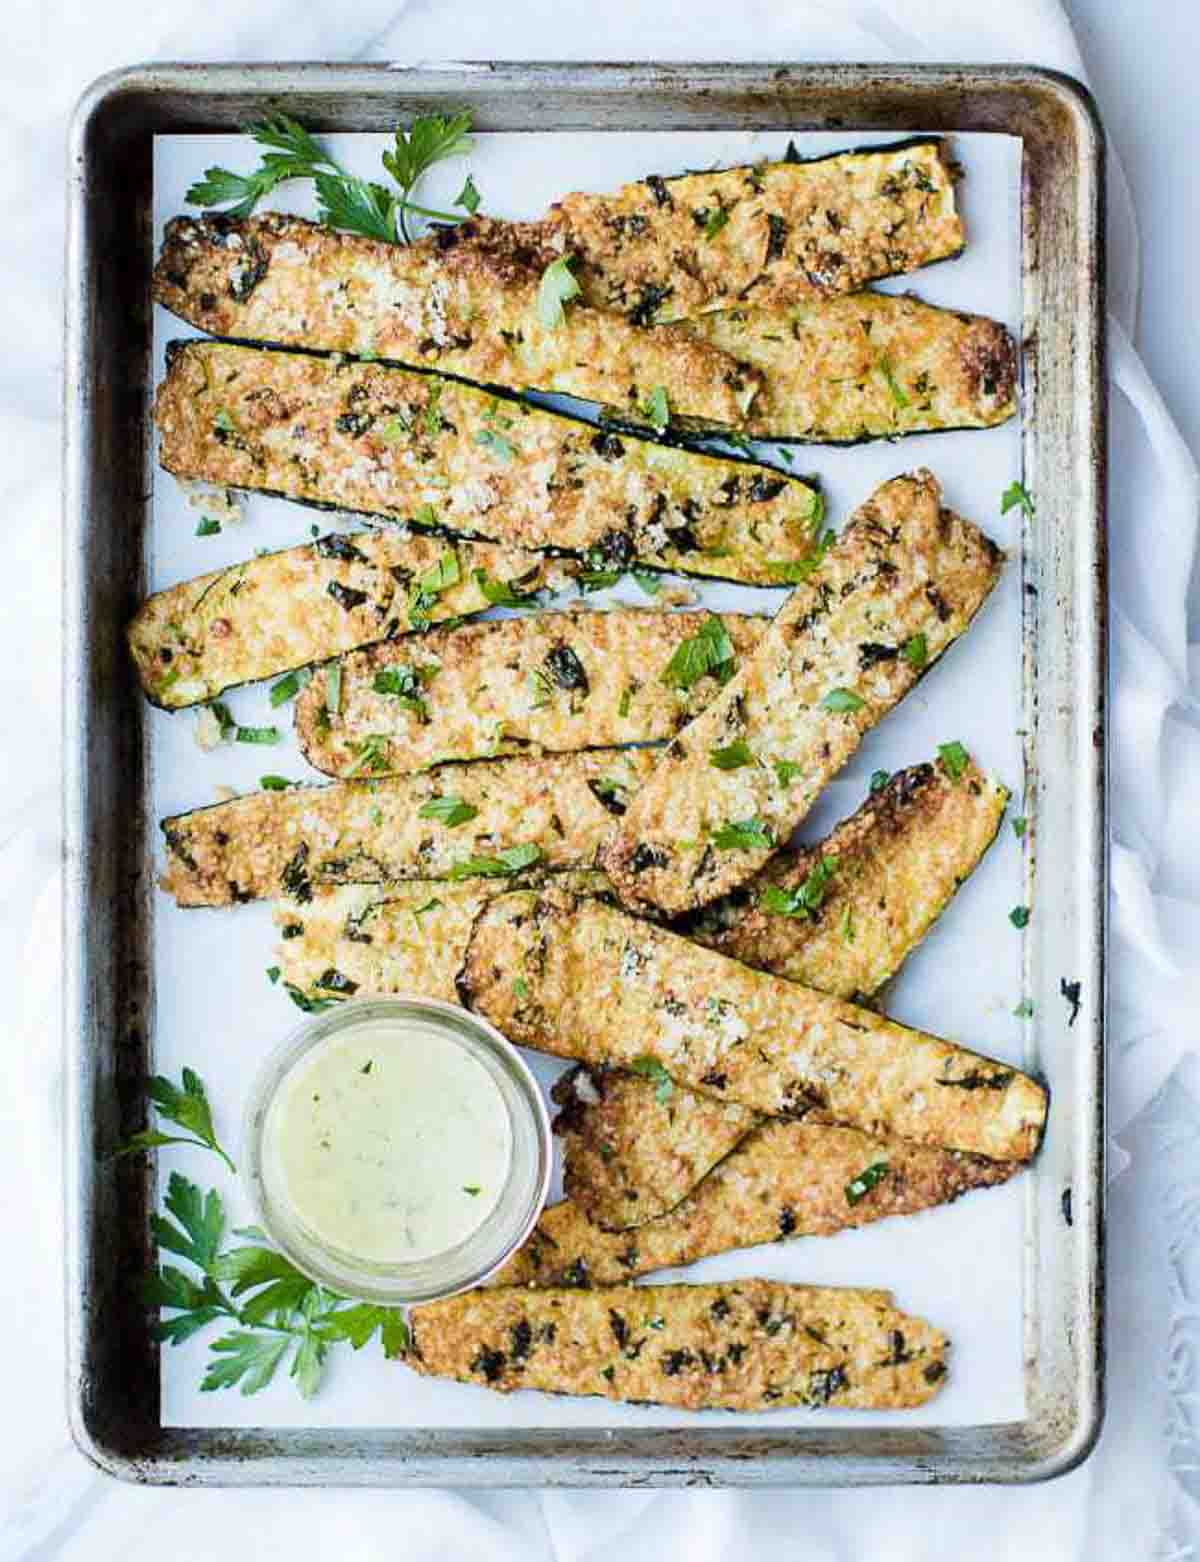 Baked parmesan crusted zucchini on a baking sheet.